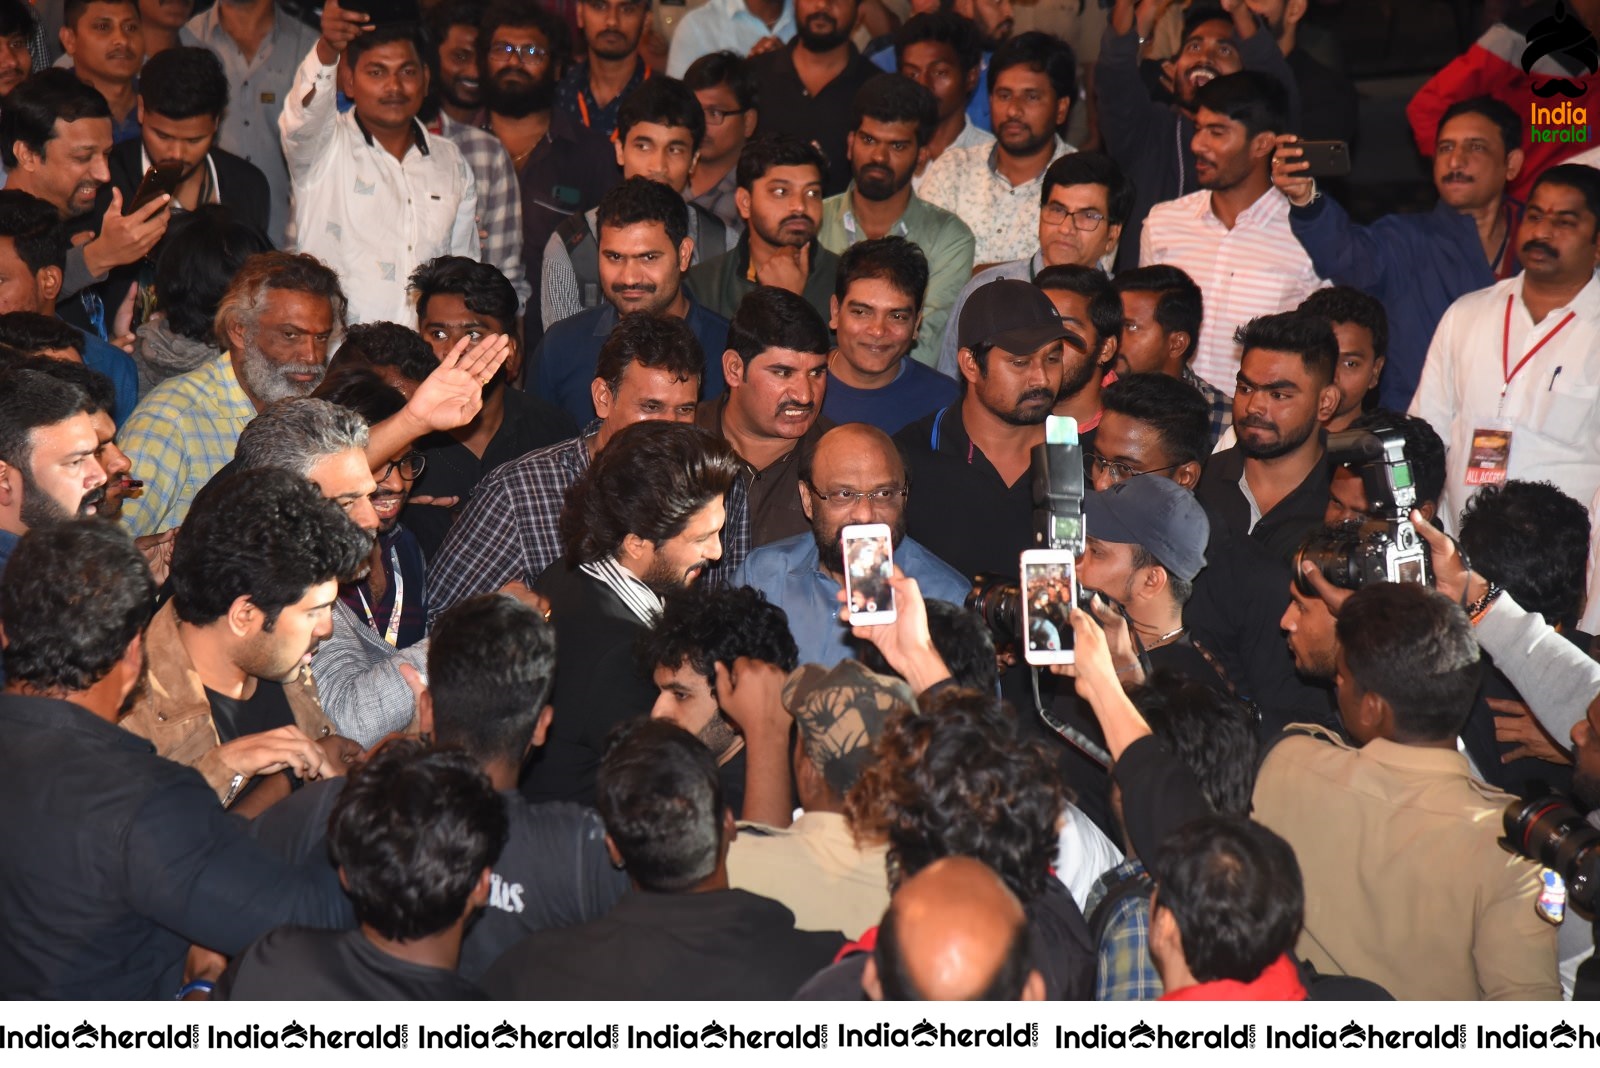 Actor Allu Arjun mobbed by Crowd during his Mass Entry Set 2